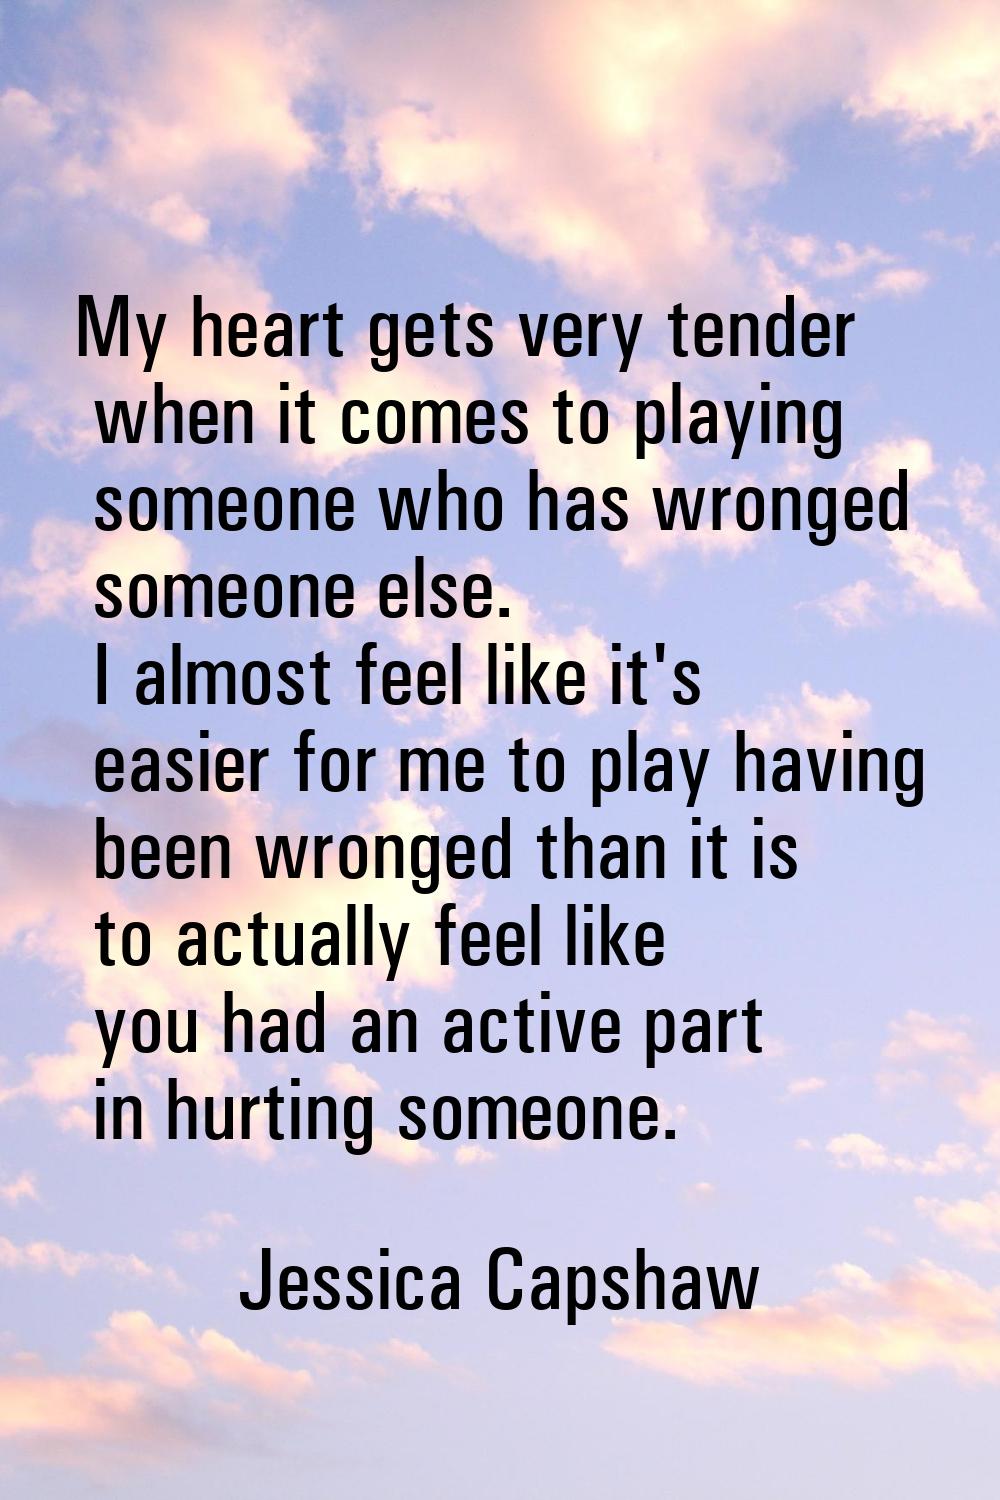 My heart gets very tender when it comes to playing someone who has wronged someone else. I almost f